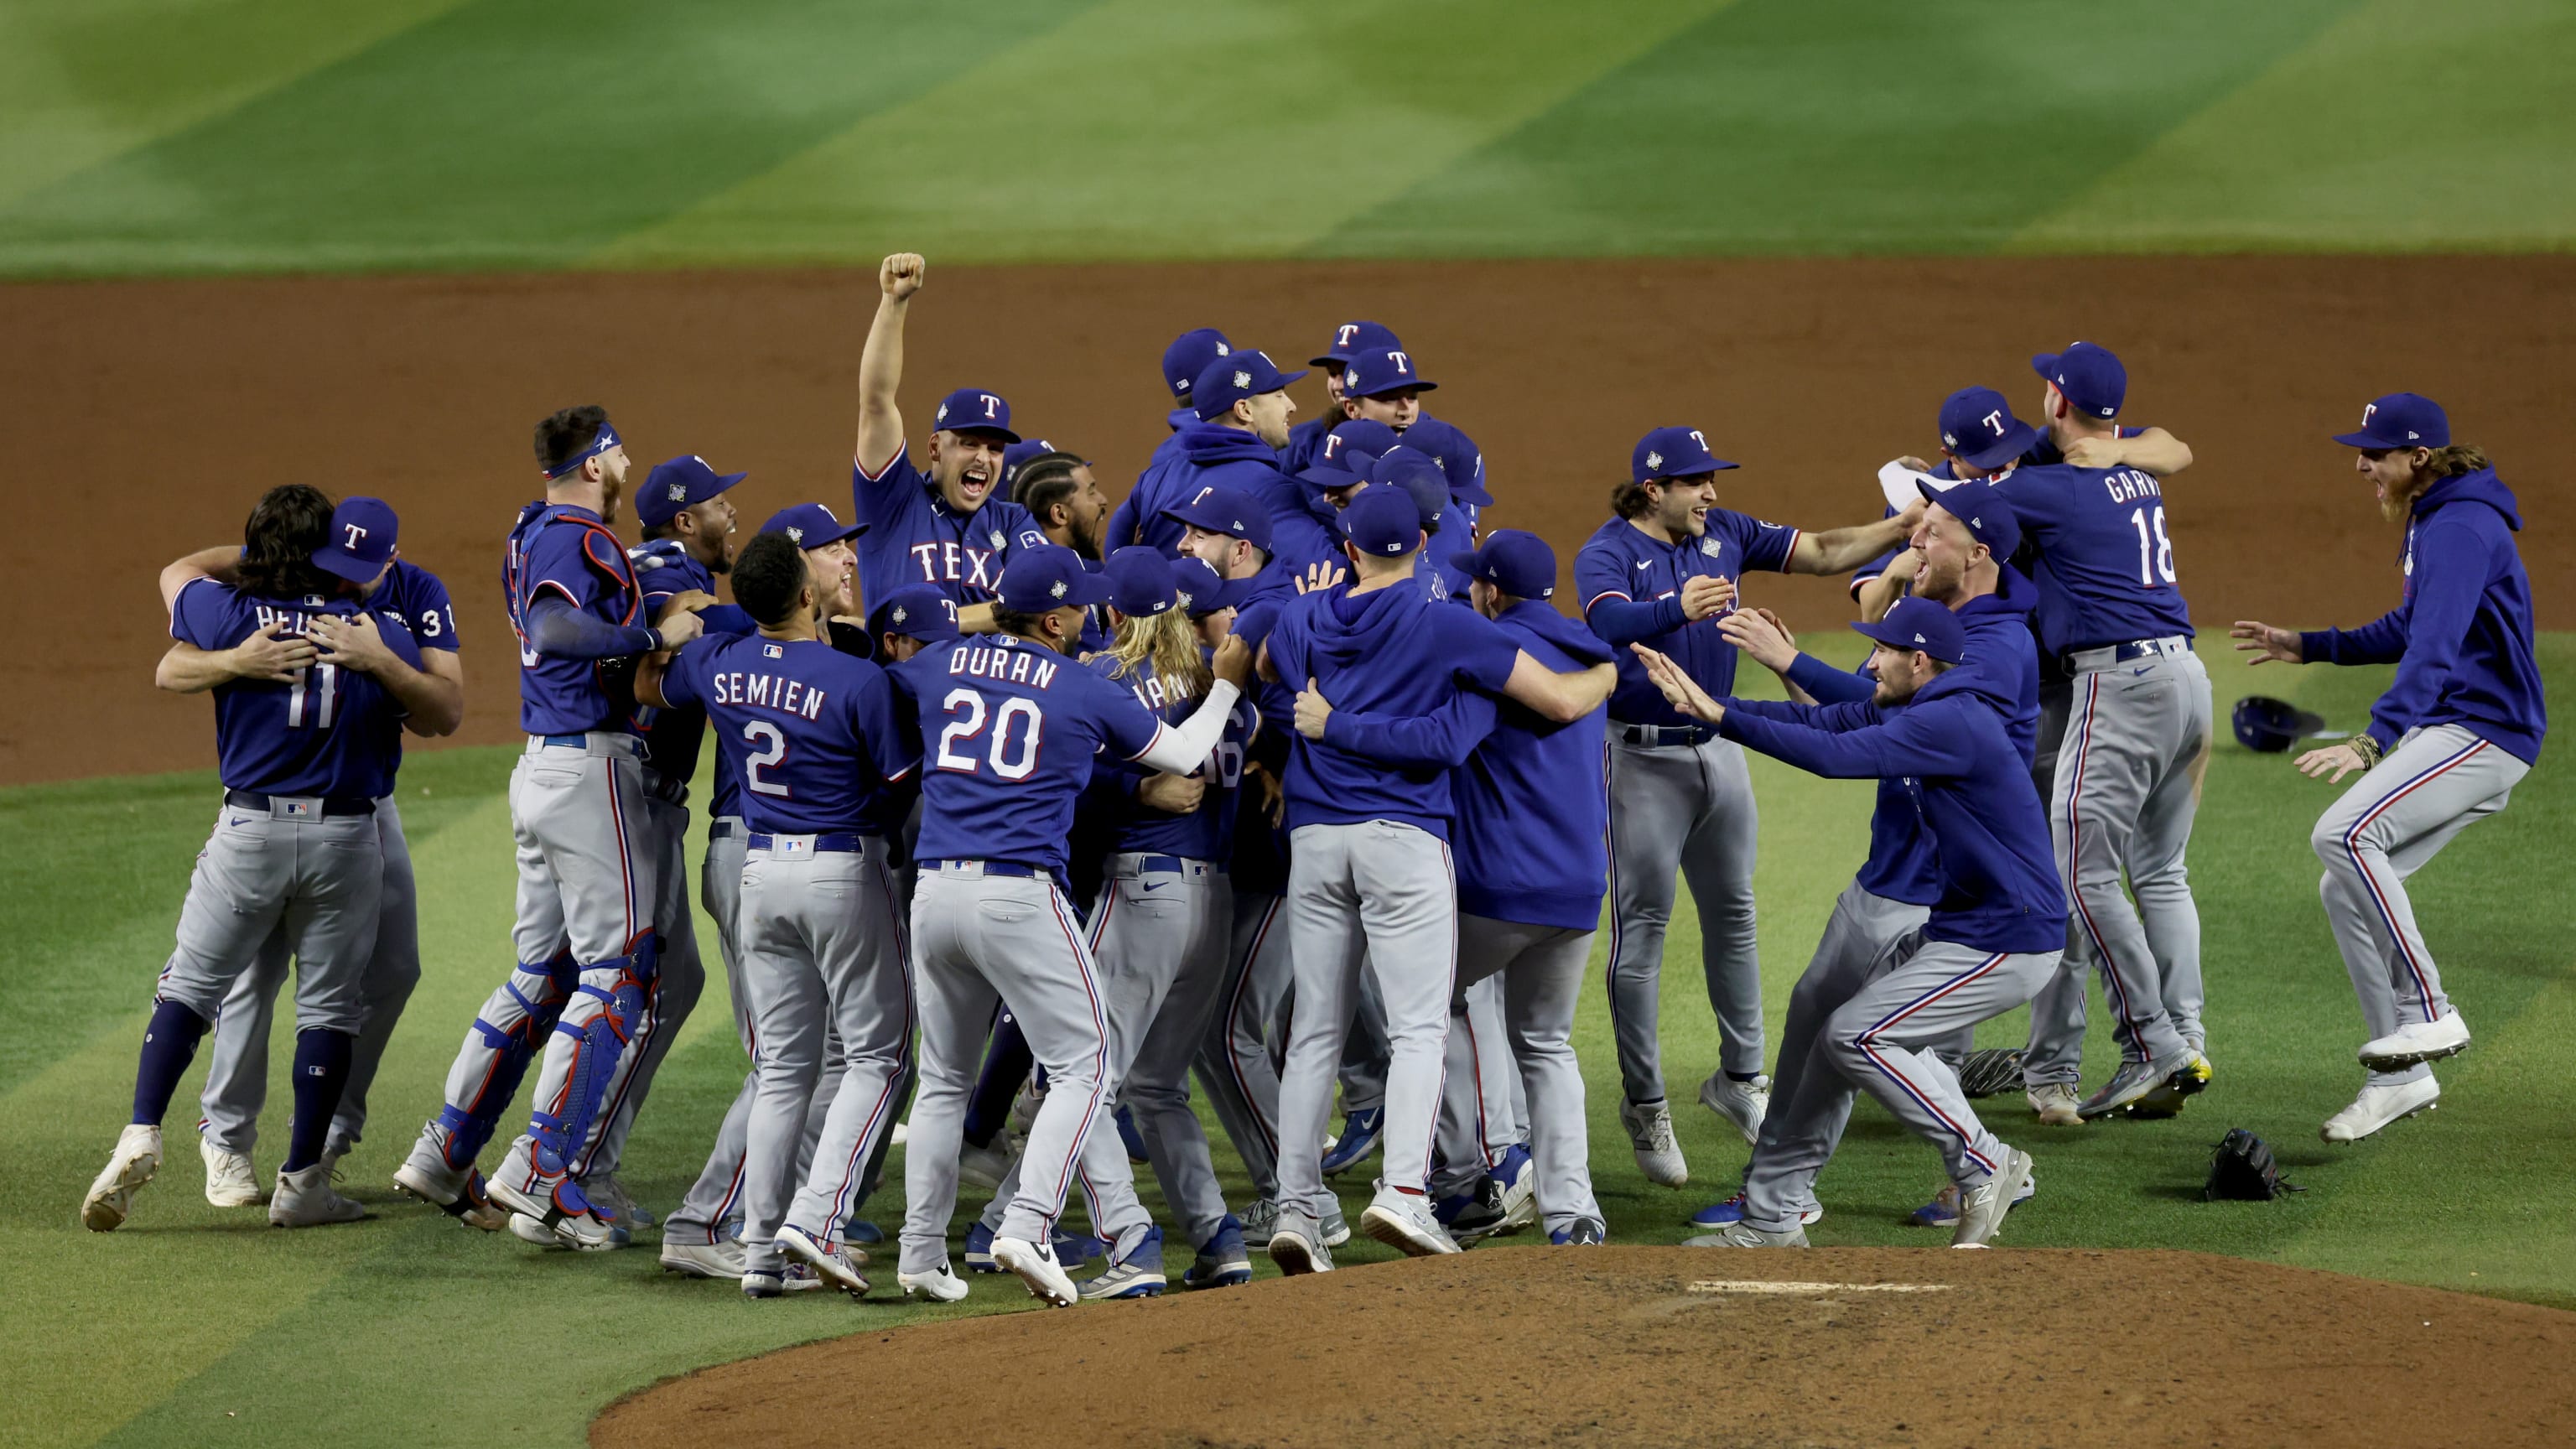 Rangers capture 1st World Series title with shutout of